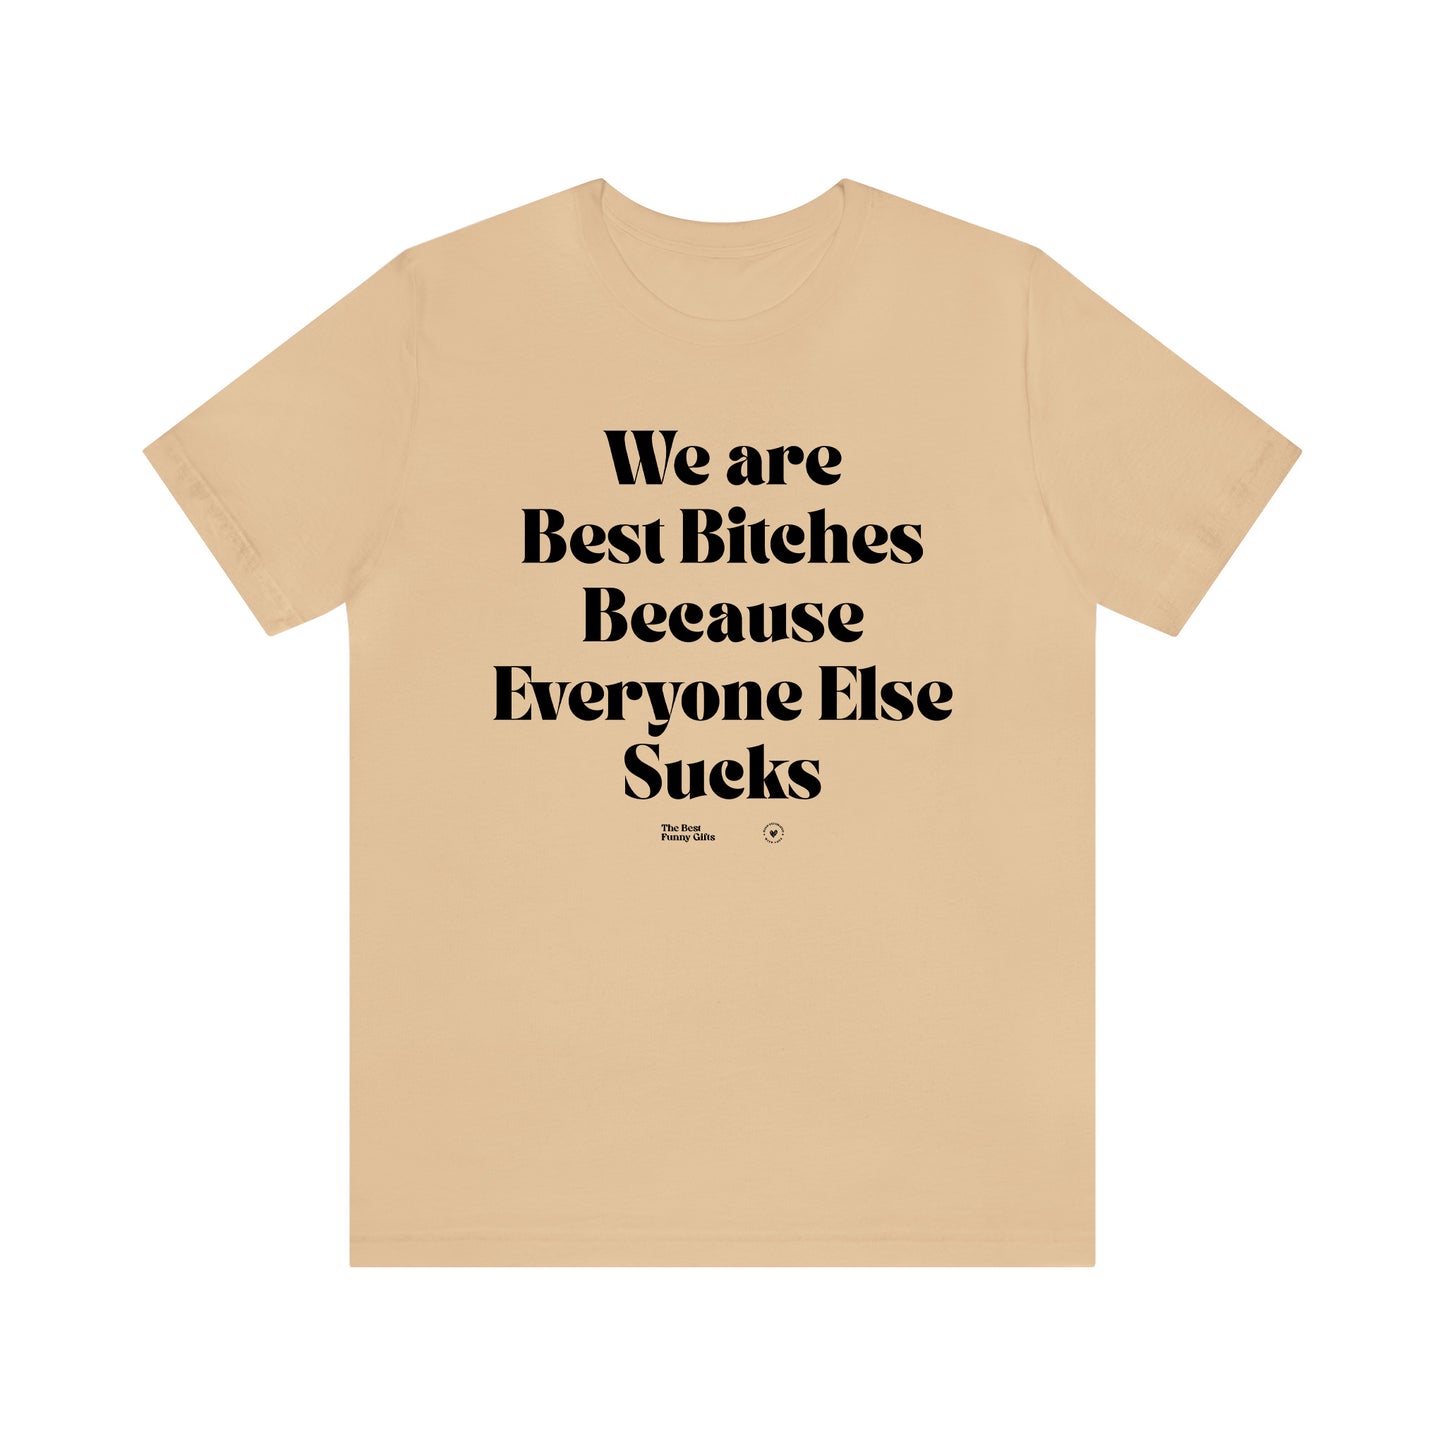 Funny Shirts for Women - We Are Best Bitches Because Everyone Else Sucks - Women’s T Shirts